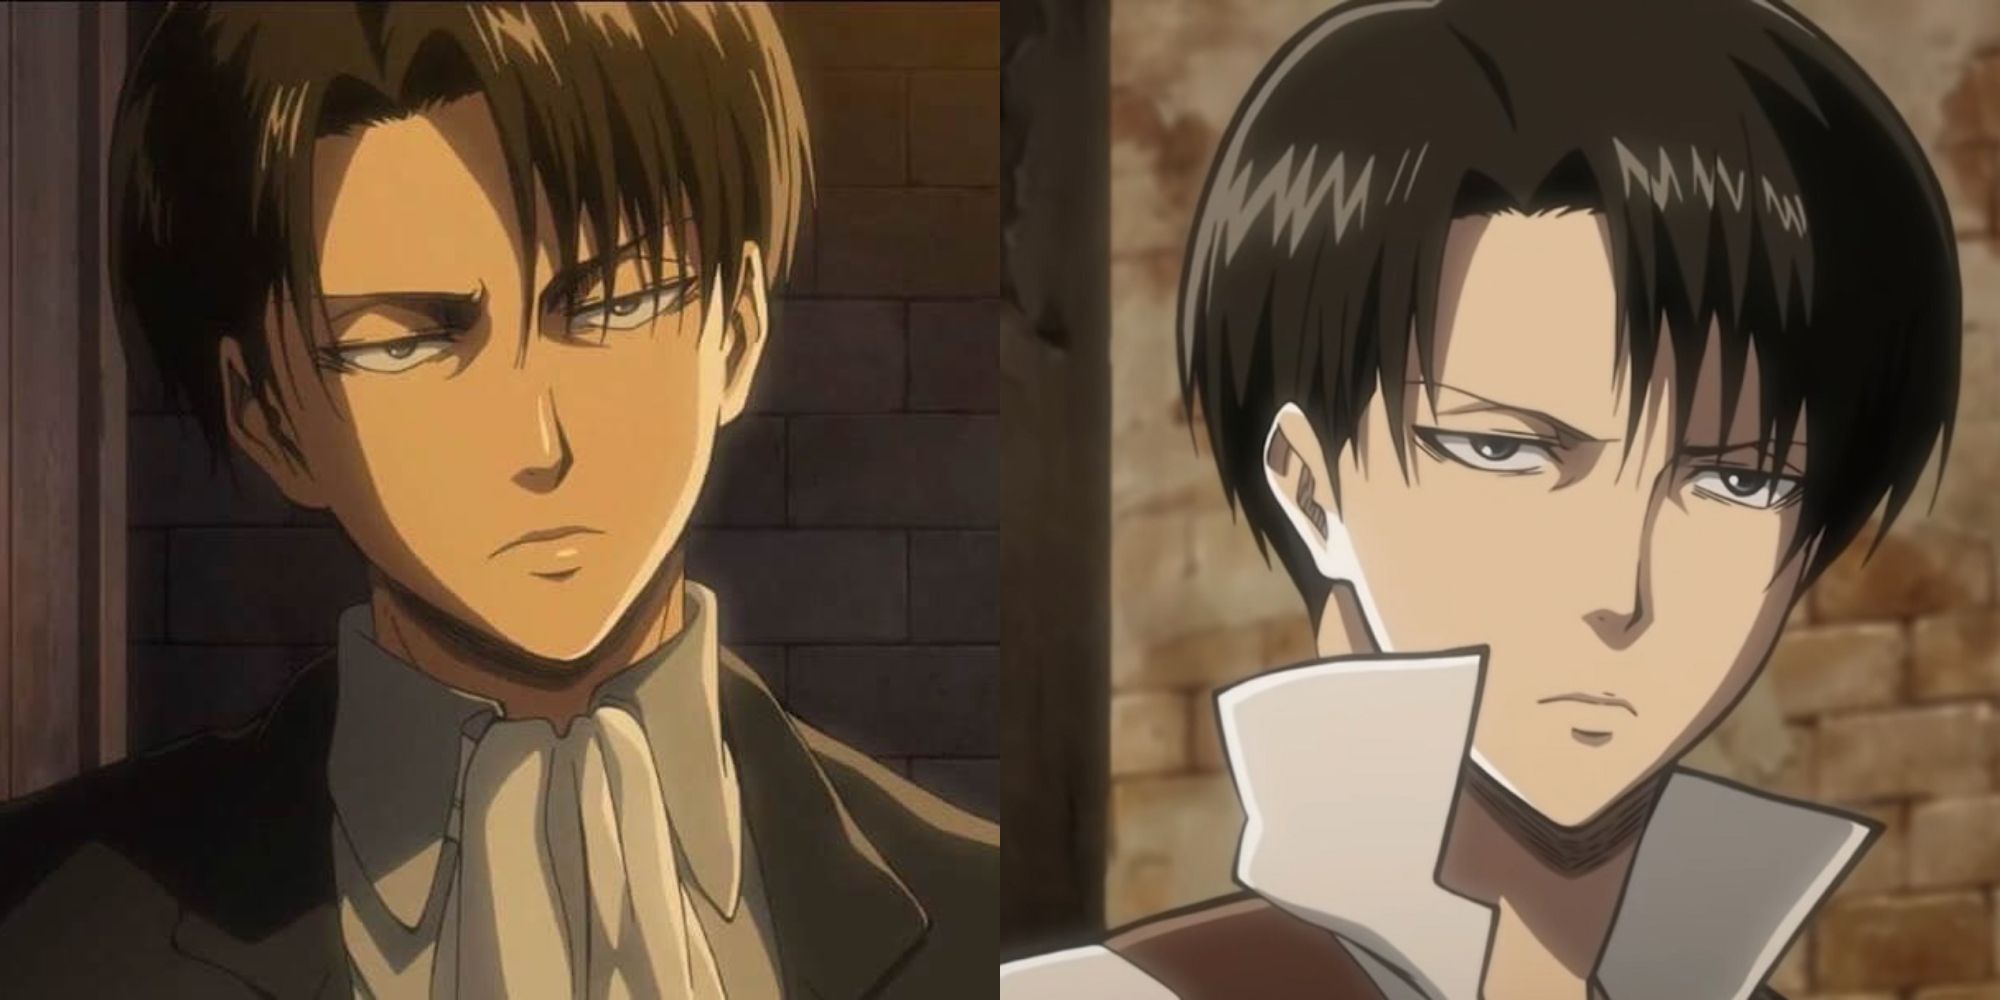 Download Anime Profile Picture Of Levi Ackerman Wallpaper | Wallpapers.com